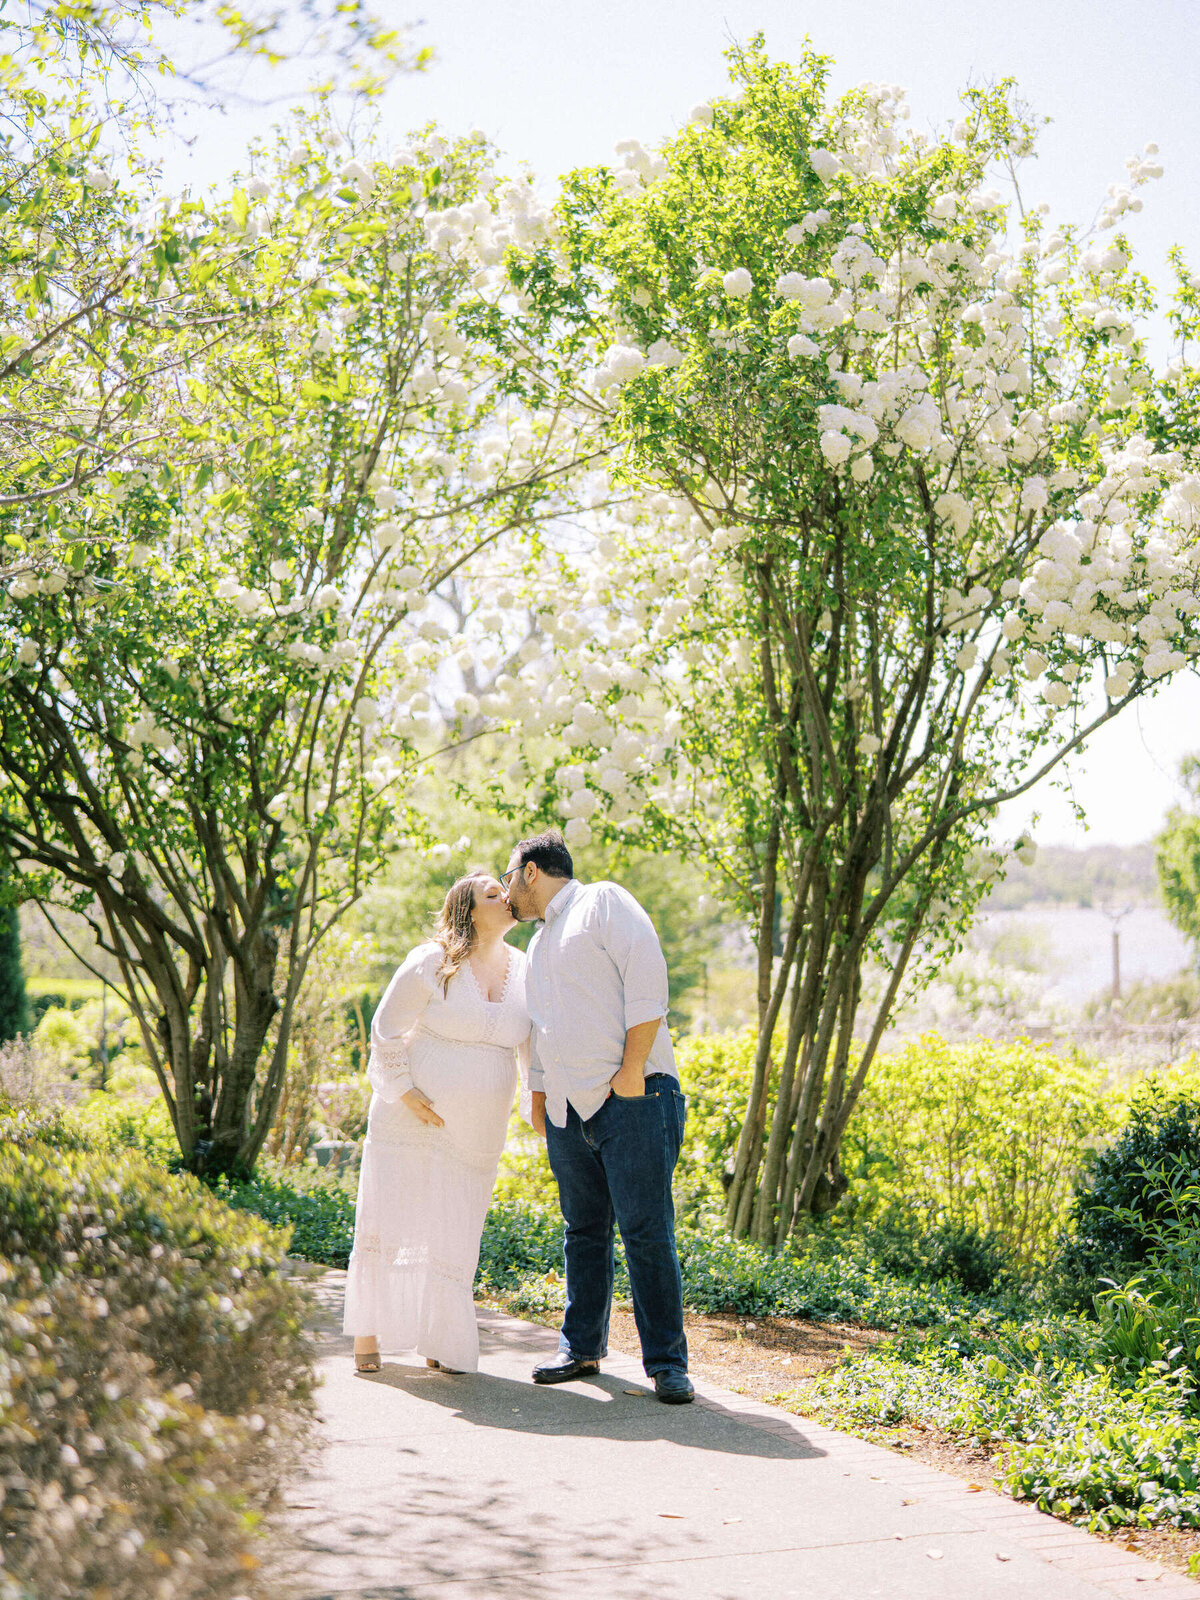 06 Dallas Arboretum Maternity Family Session Kate Panza Photography Kim and Nic